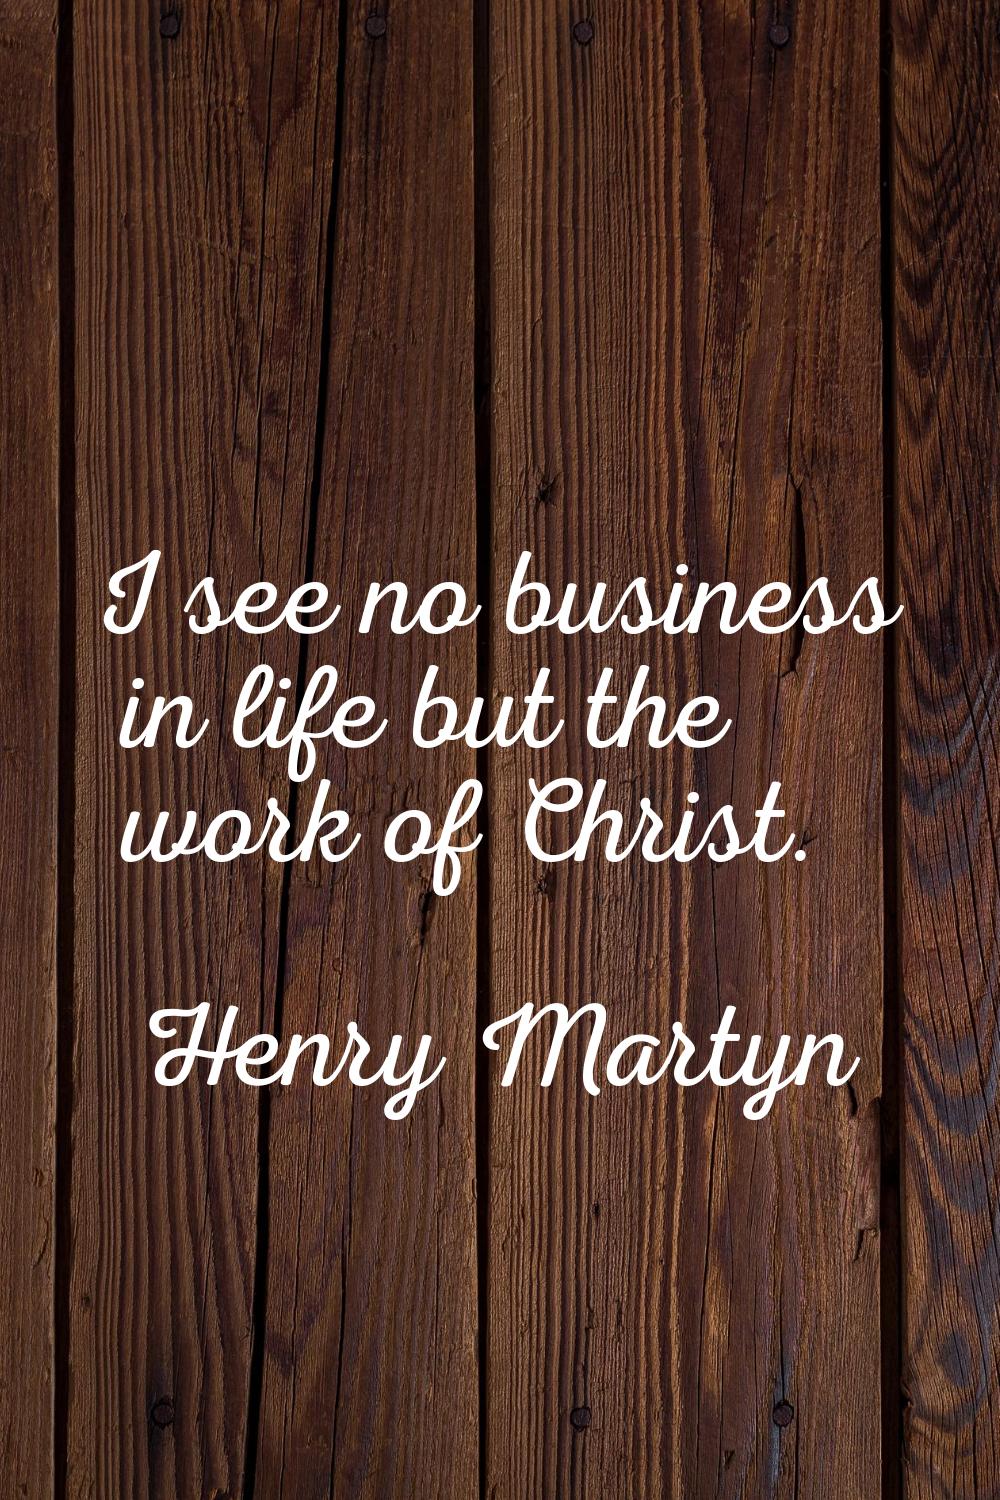 I see no business in life but the work of Christ.